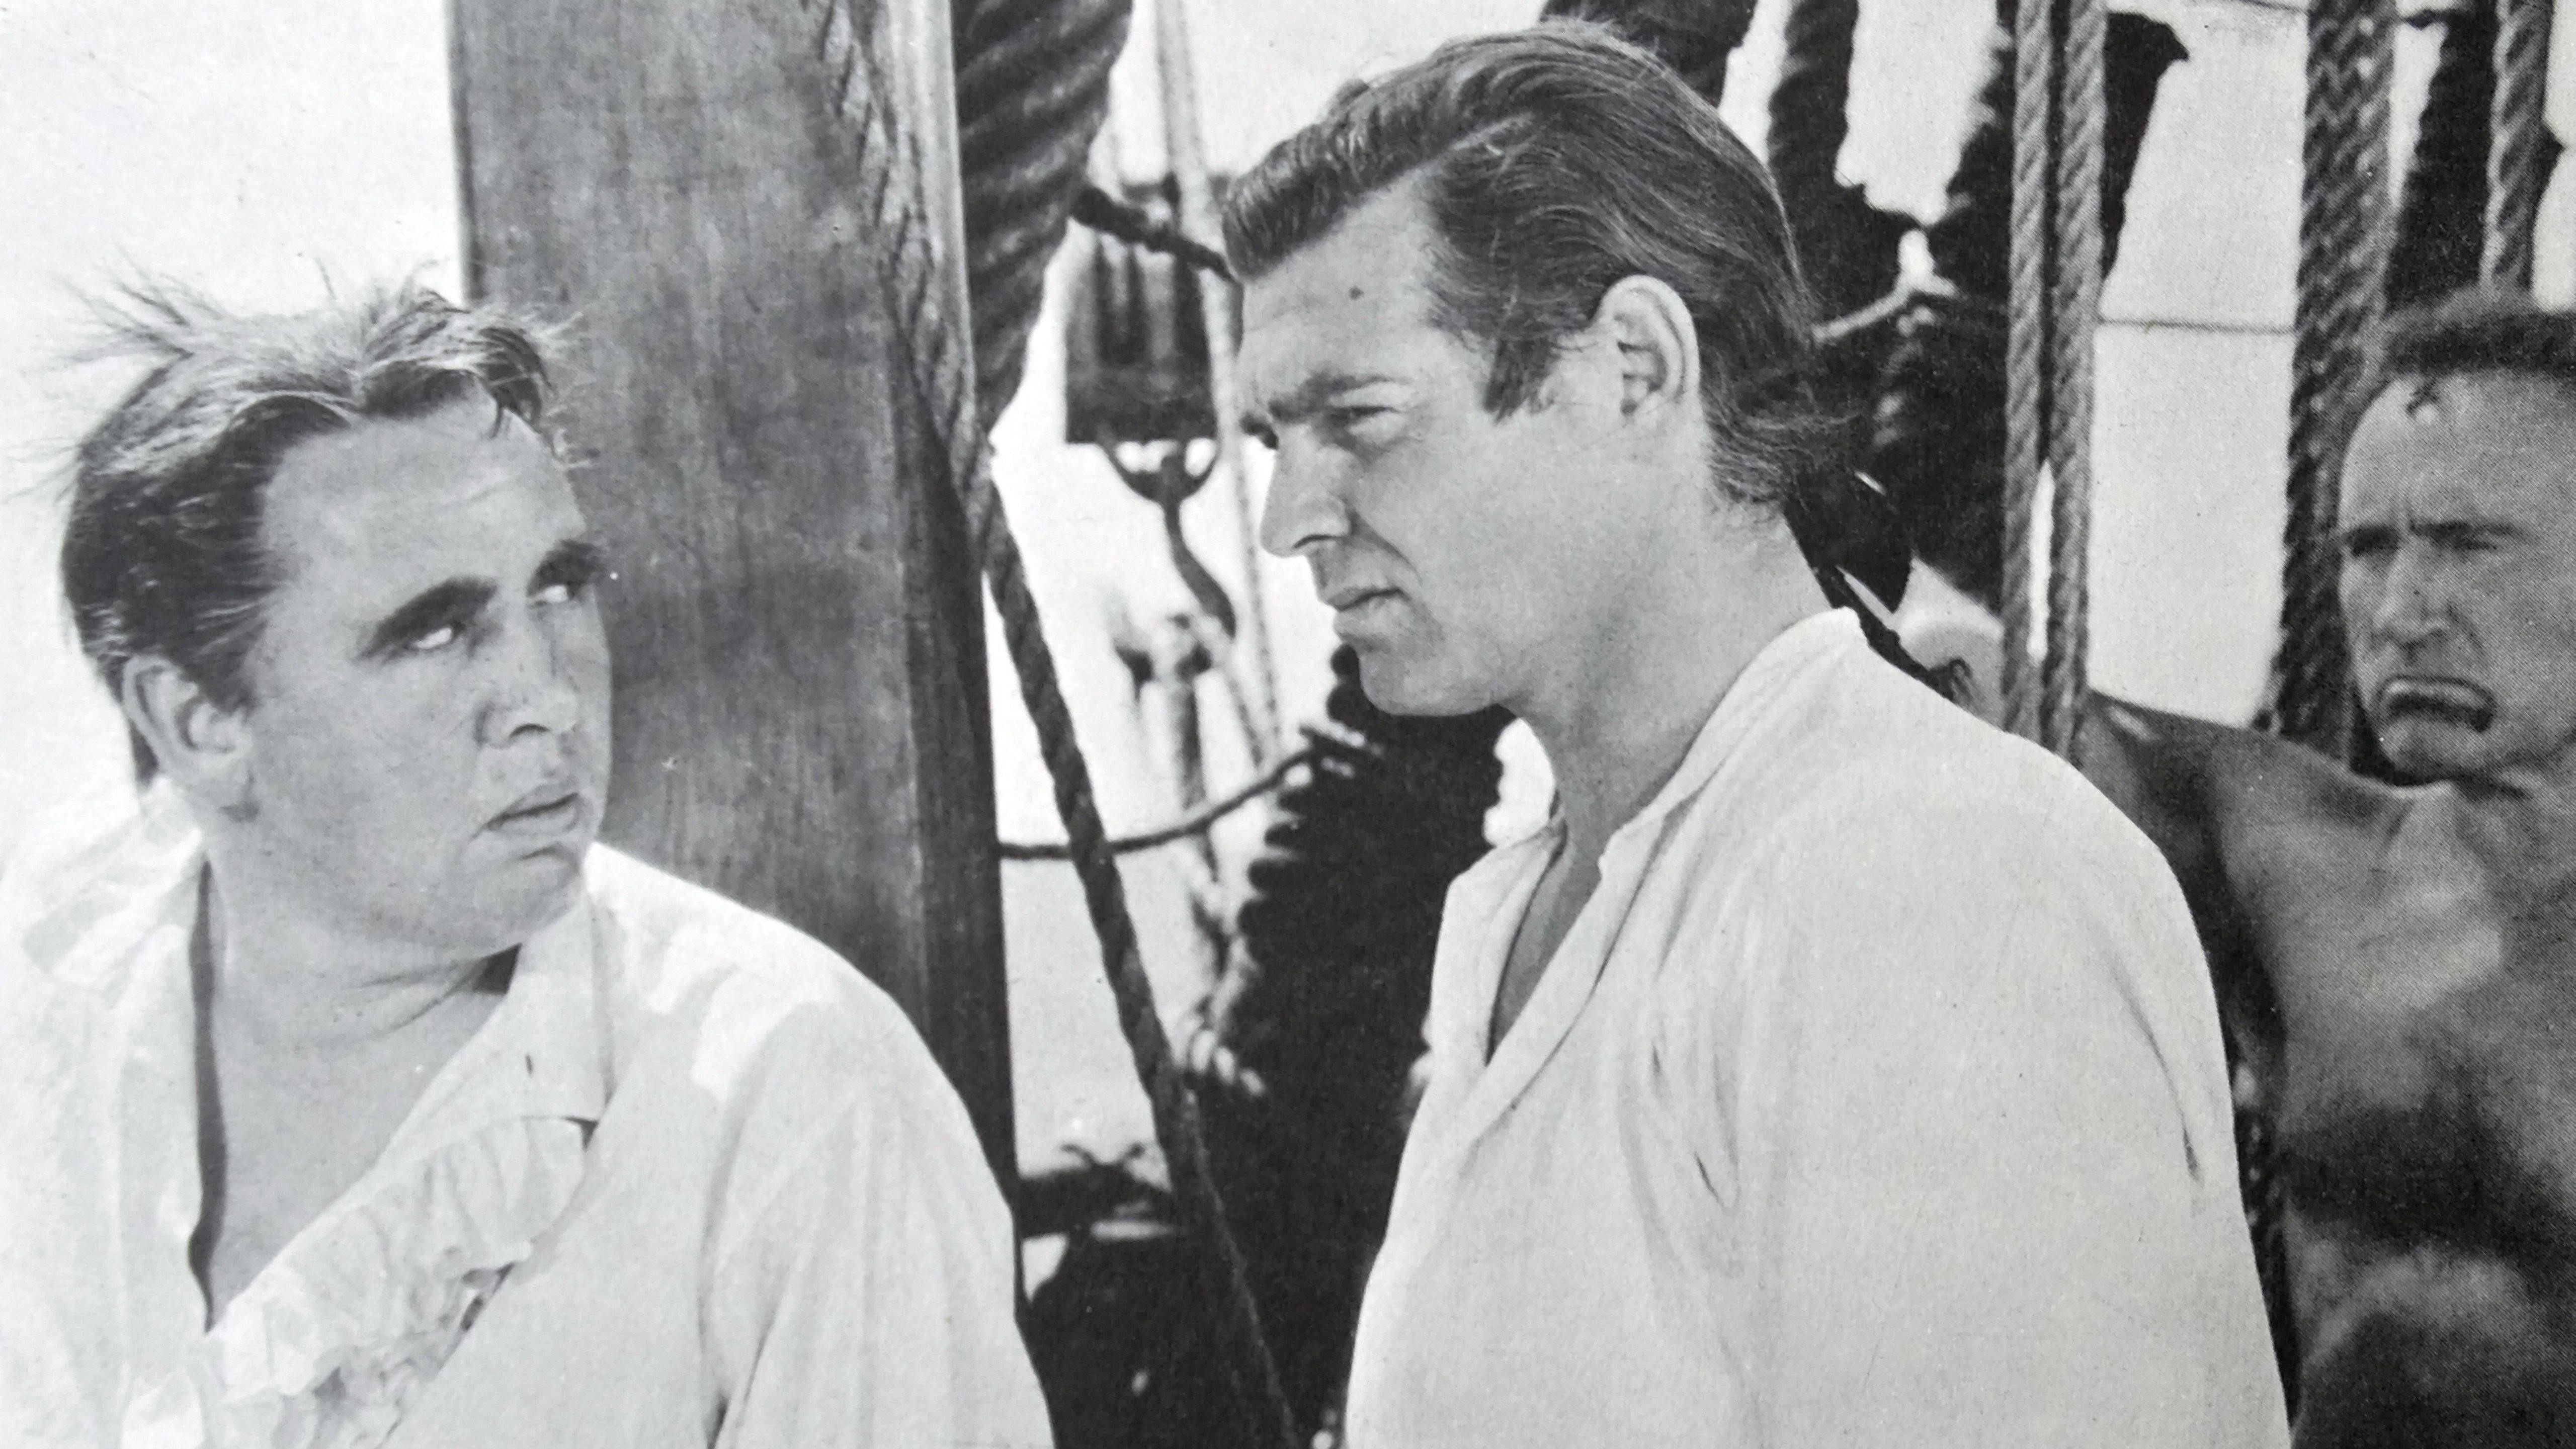 Charles Laughton and Clark Gable in Mutiny on the Bounty